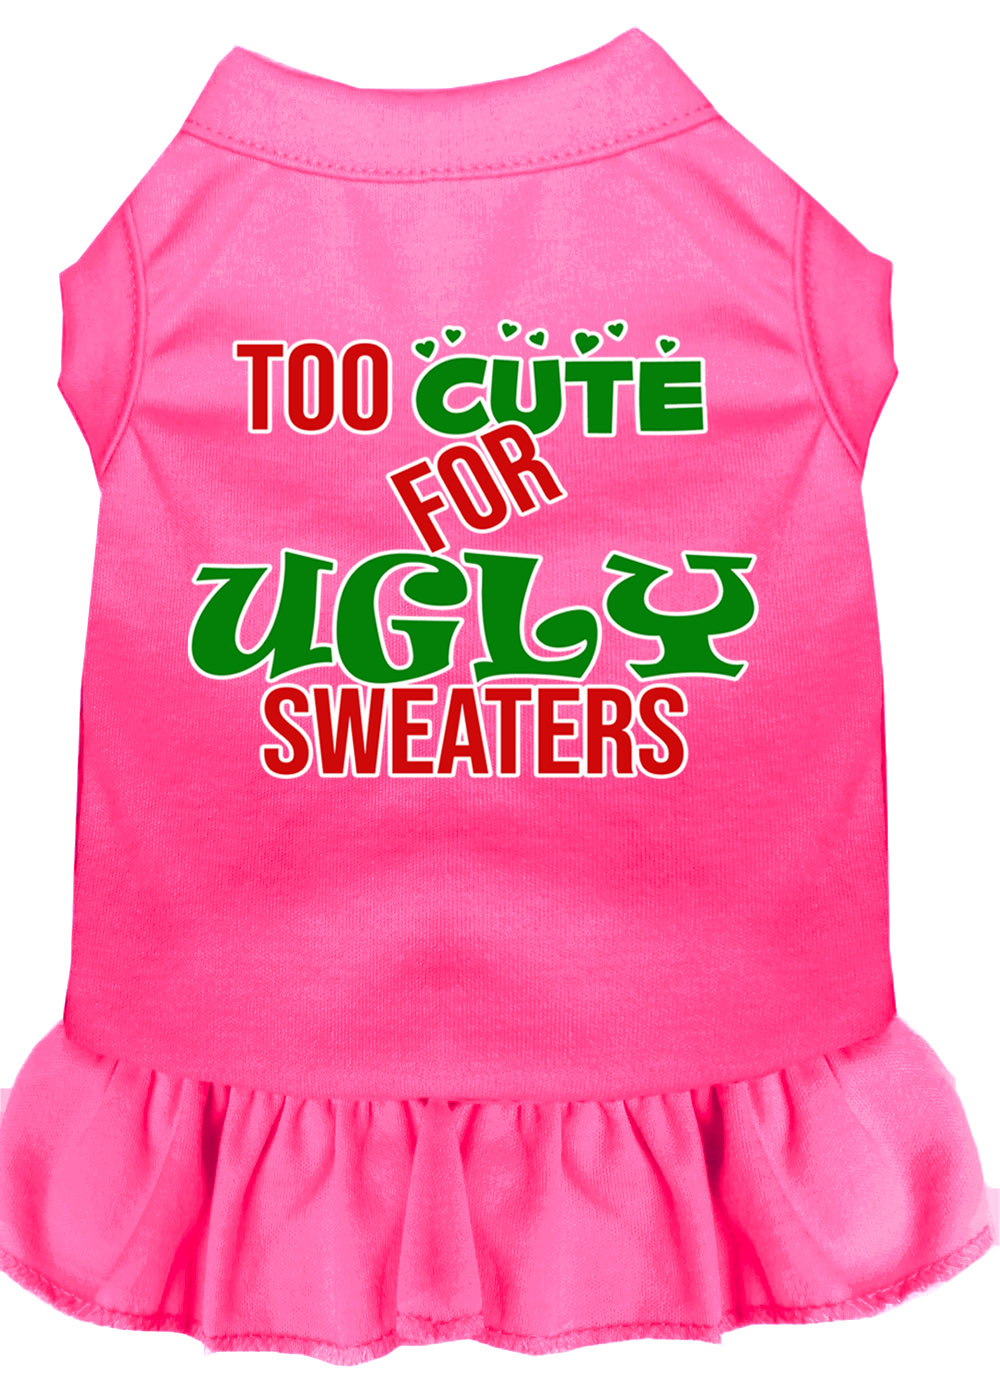 Too Cute for Ugly Sweaters Screen Print Dog Dress Bright Pink XXXL